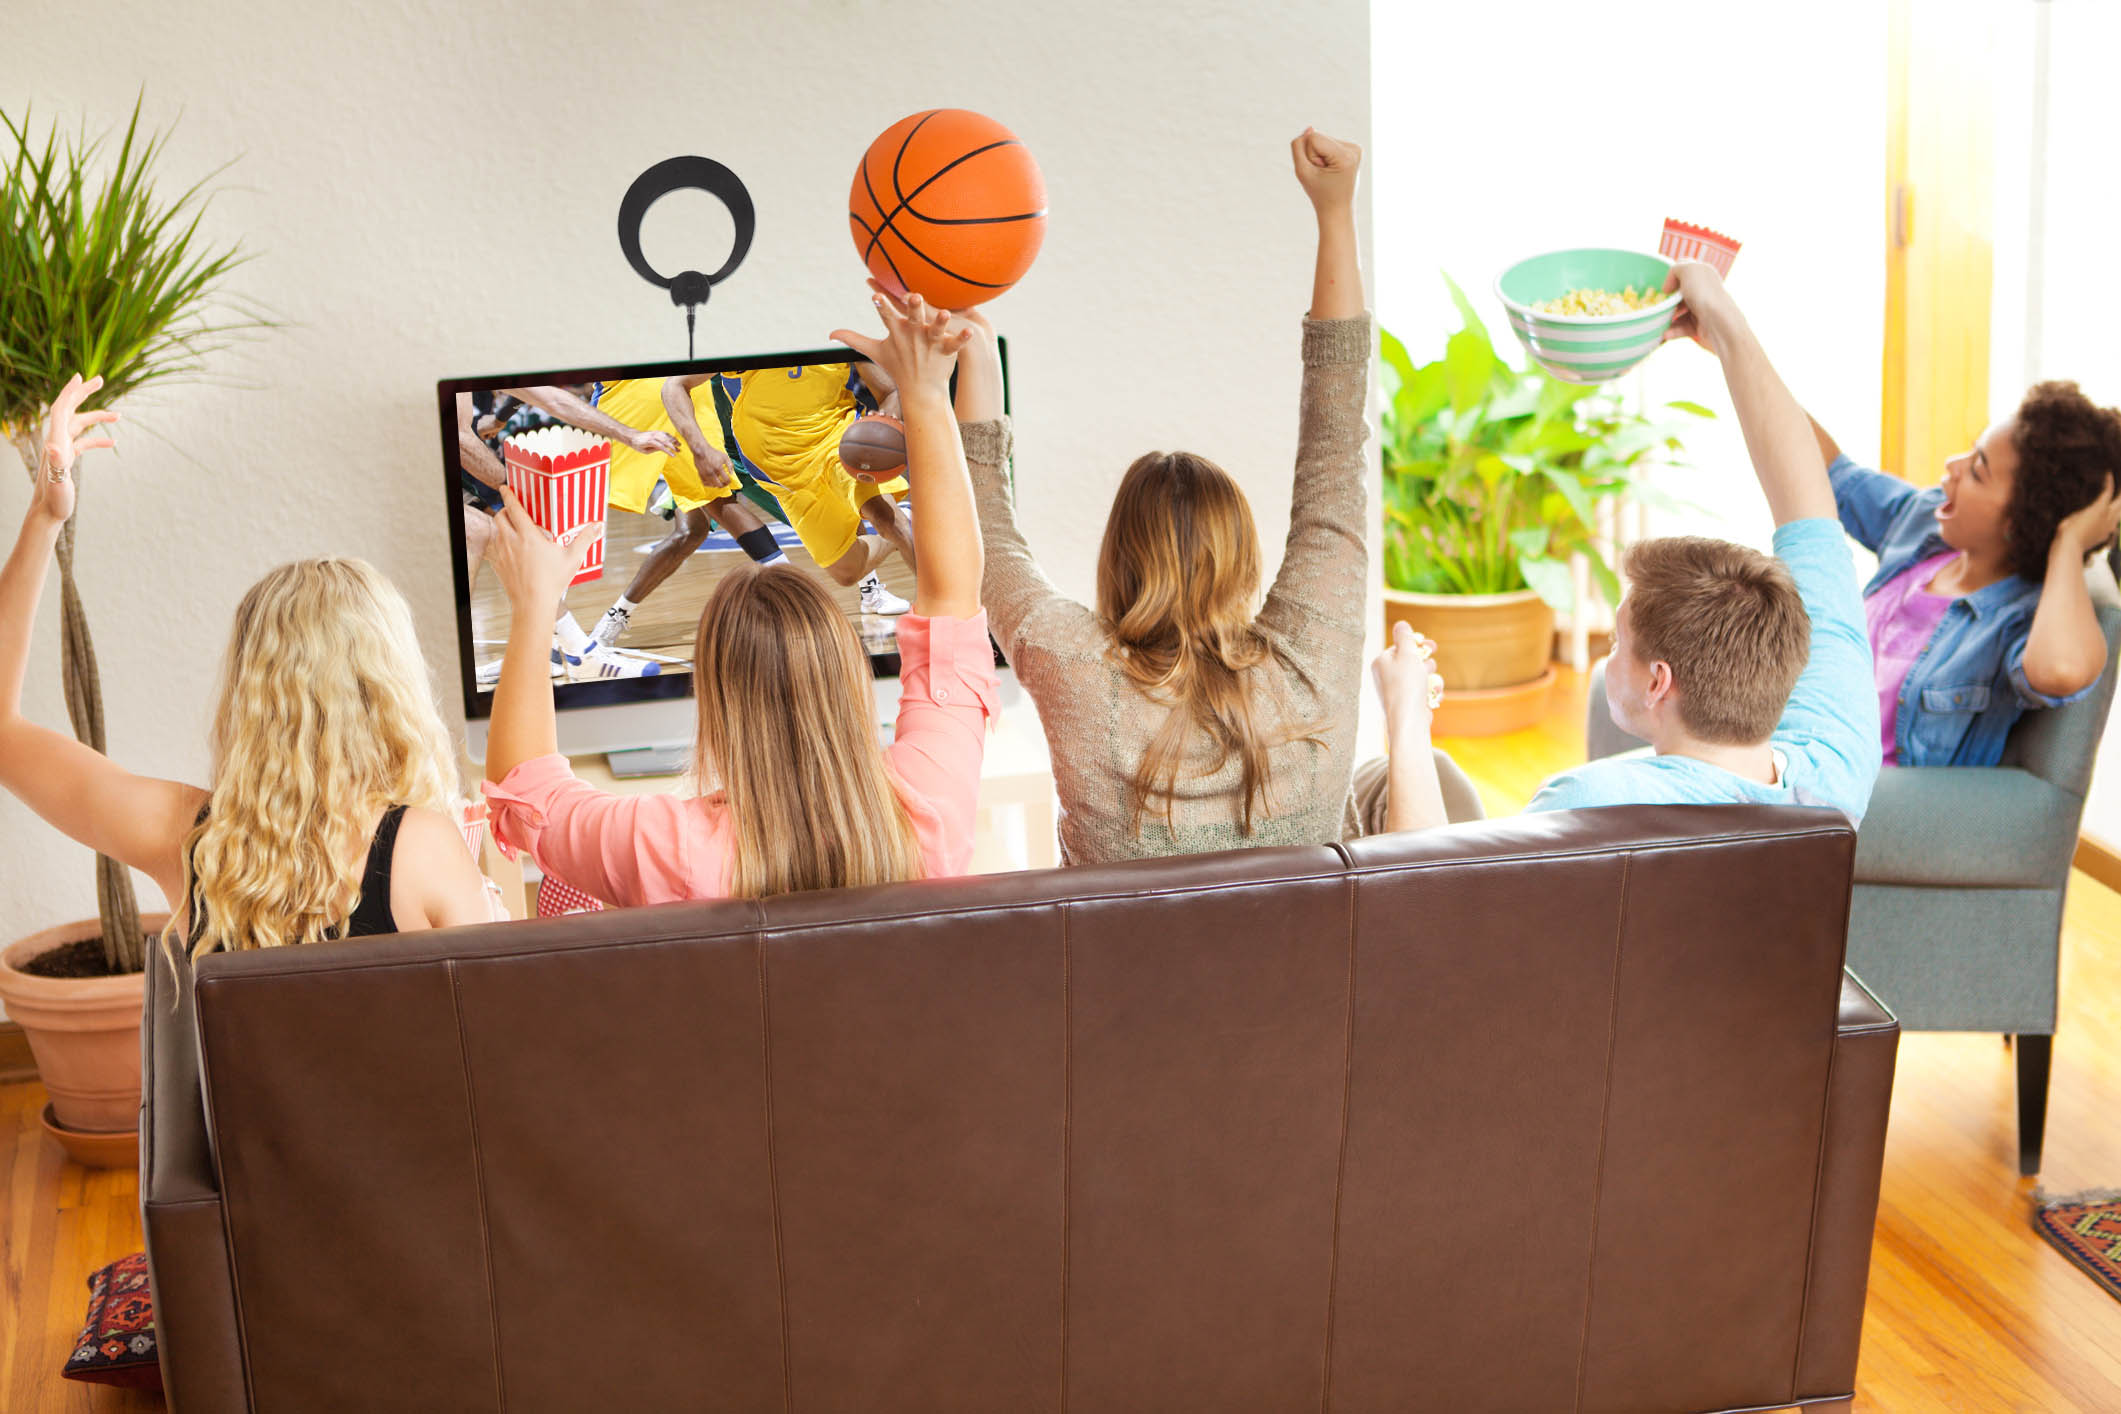 Results image of group of people watching Basketball with antenna